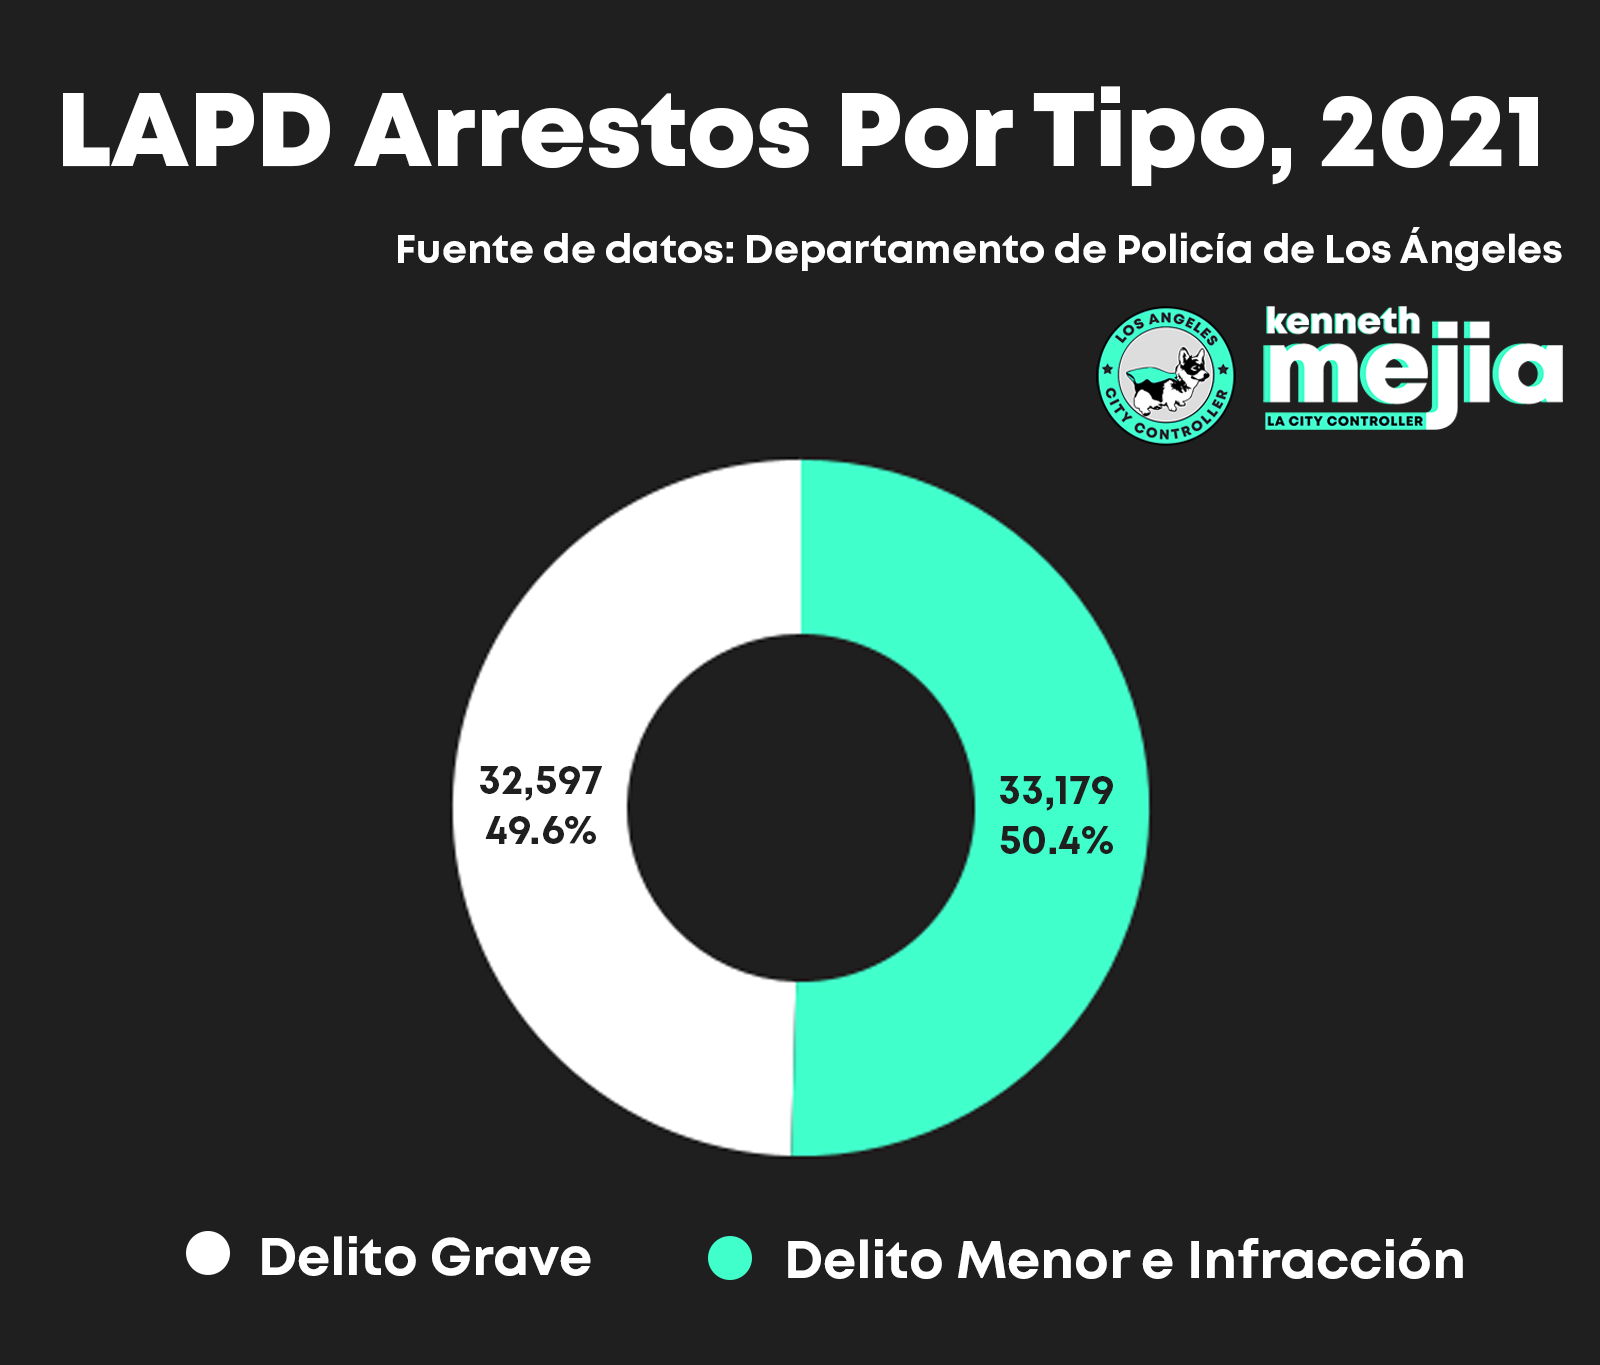 A bar chart of LAPD Arrests by Council District, 2021. There are still fewer arrests overall compared to 2019. There are 15 Council Districts. Council Districts 8 and 14 have the highest number of arrests, at around 6,000 arrests, and are also fairly close in number of arrests to districts 9, and 11 which are also close to 6,000 arrests. CDs 1, 6, and 13 each have around 5,000 arrests. The rest of the Council Districts havemuch fewer than 5,000 arrests. CDs 5 and 12 again have the fewest number of arrests, at under 2,500 arrests each. Source of data is LAPD.